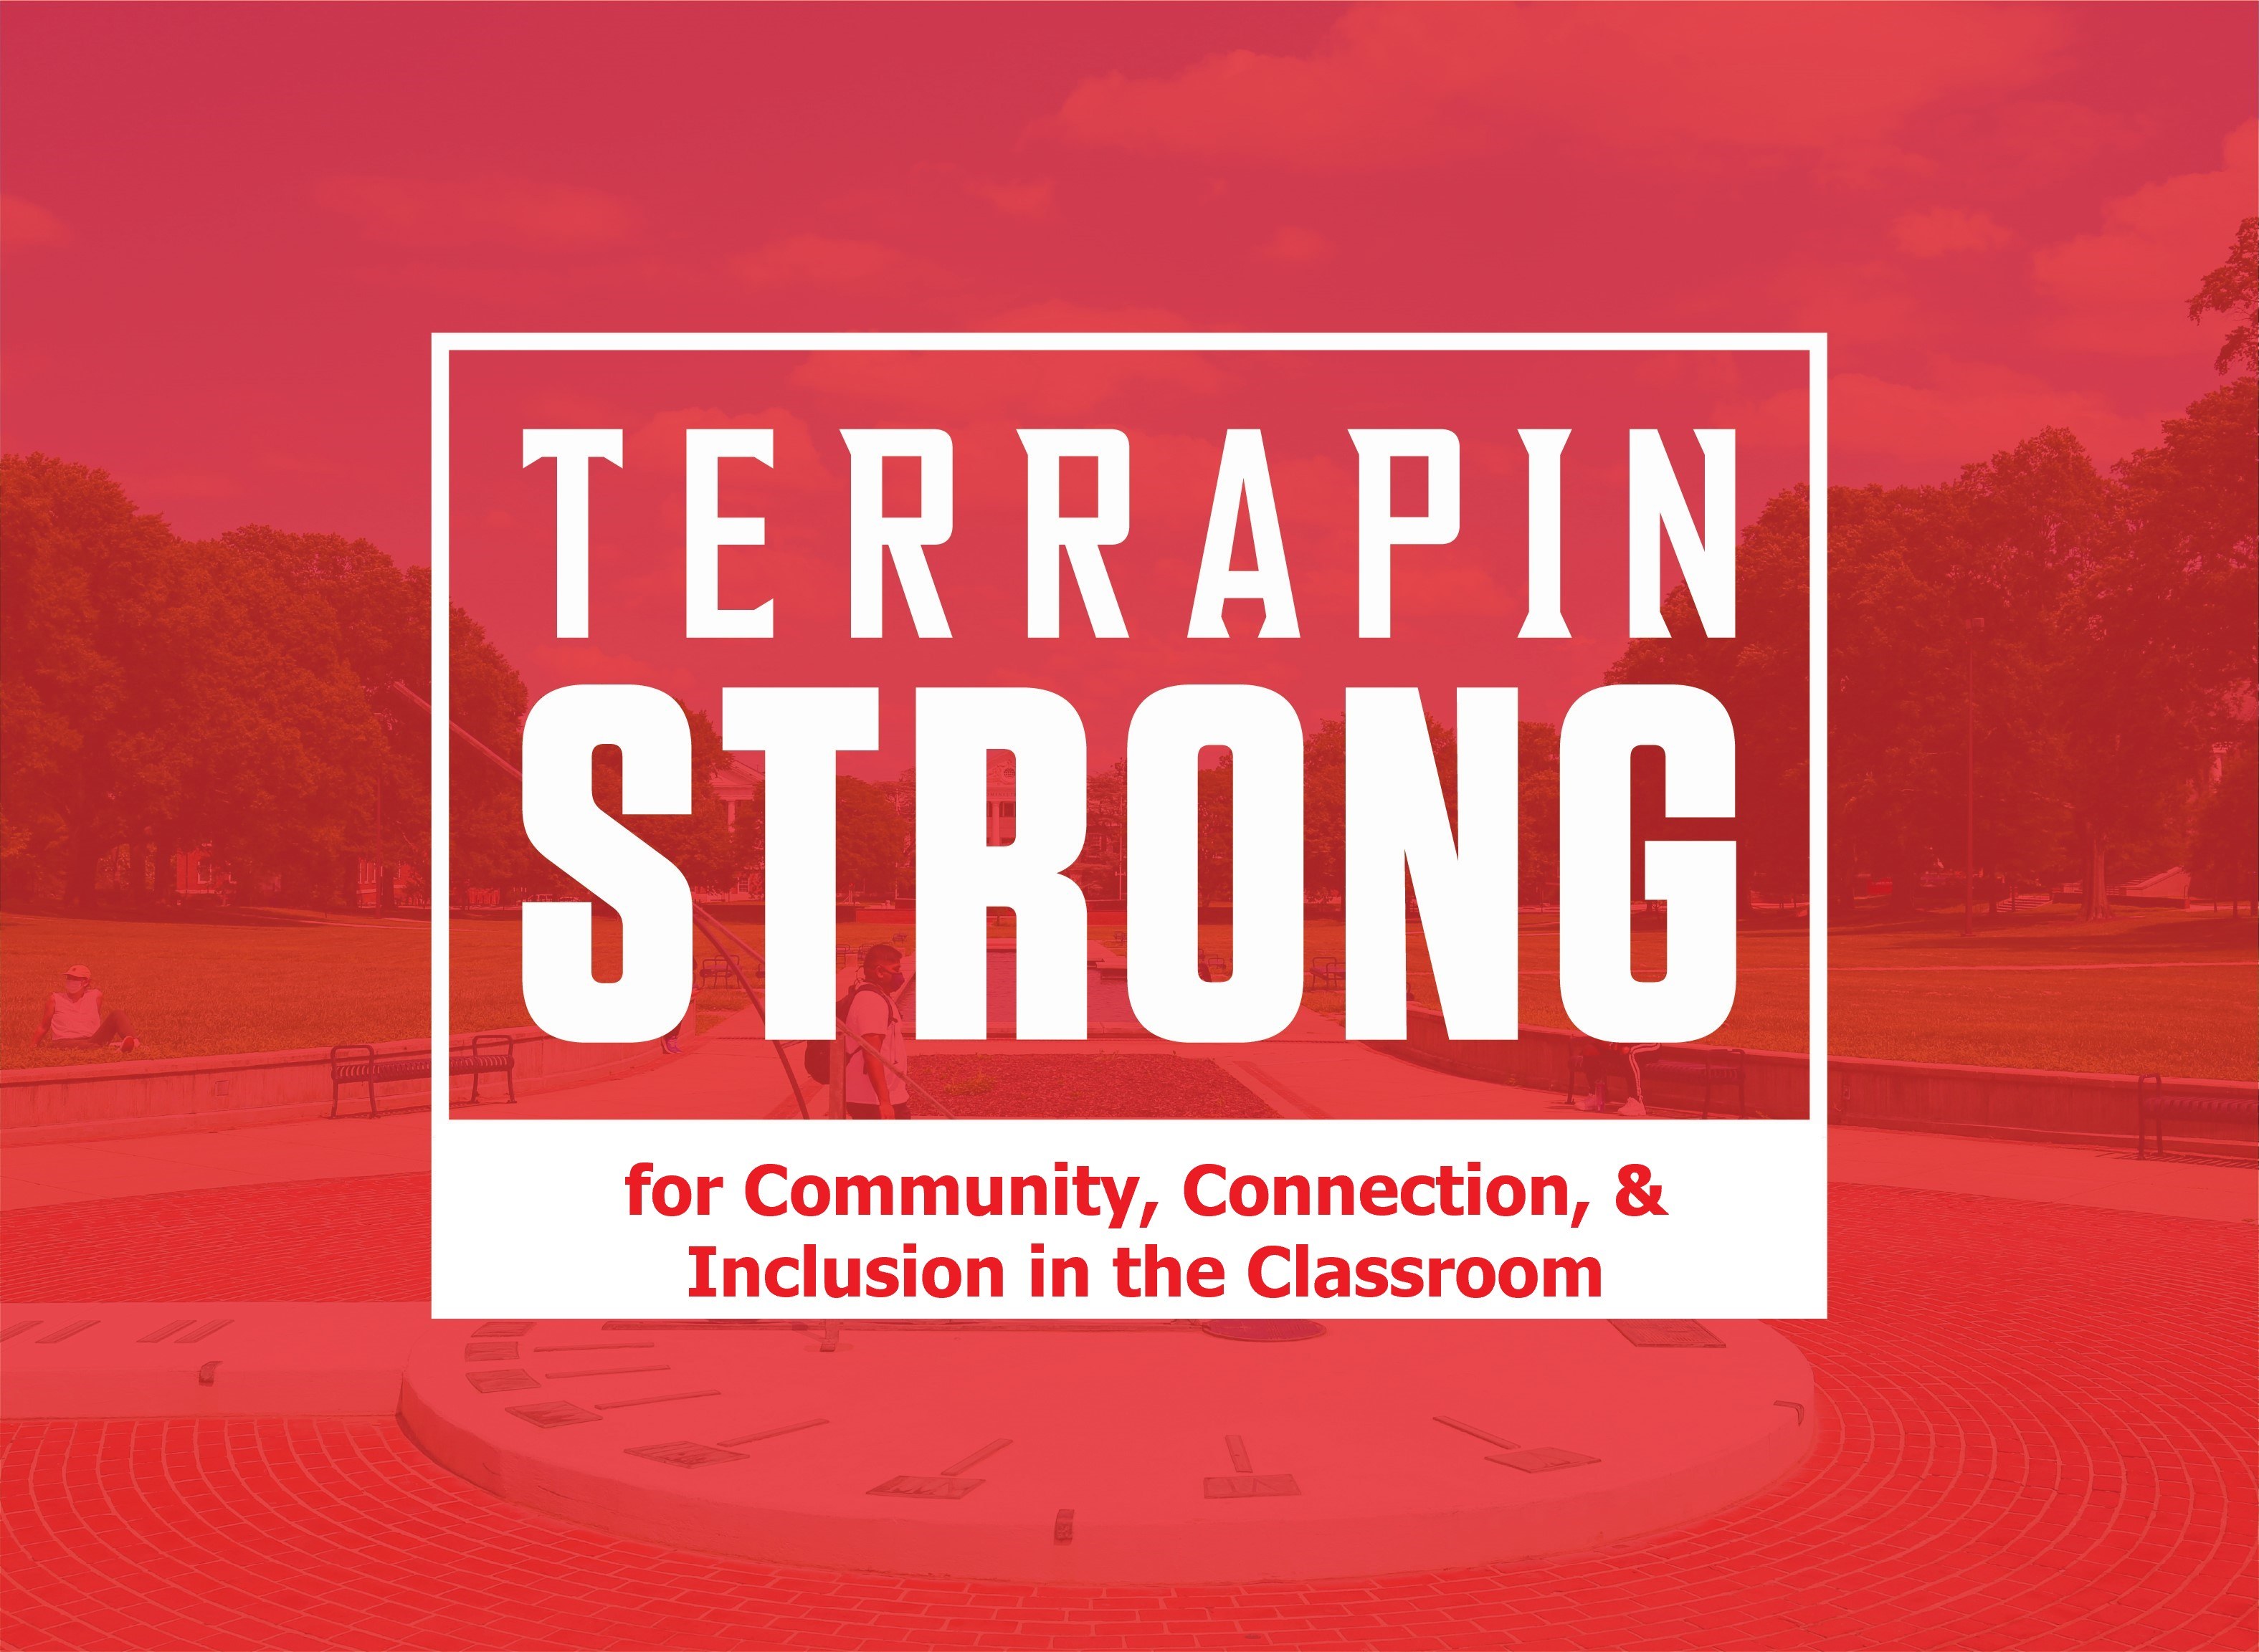 TerrapinSTRONG for Community, Connection & Inclusion in the Classroom